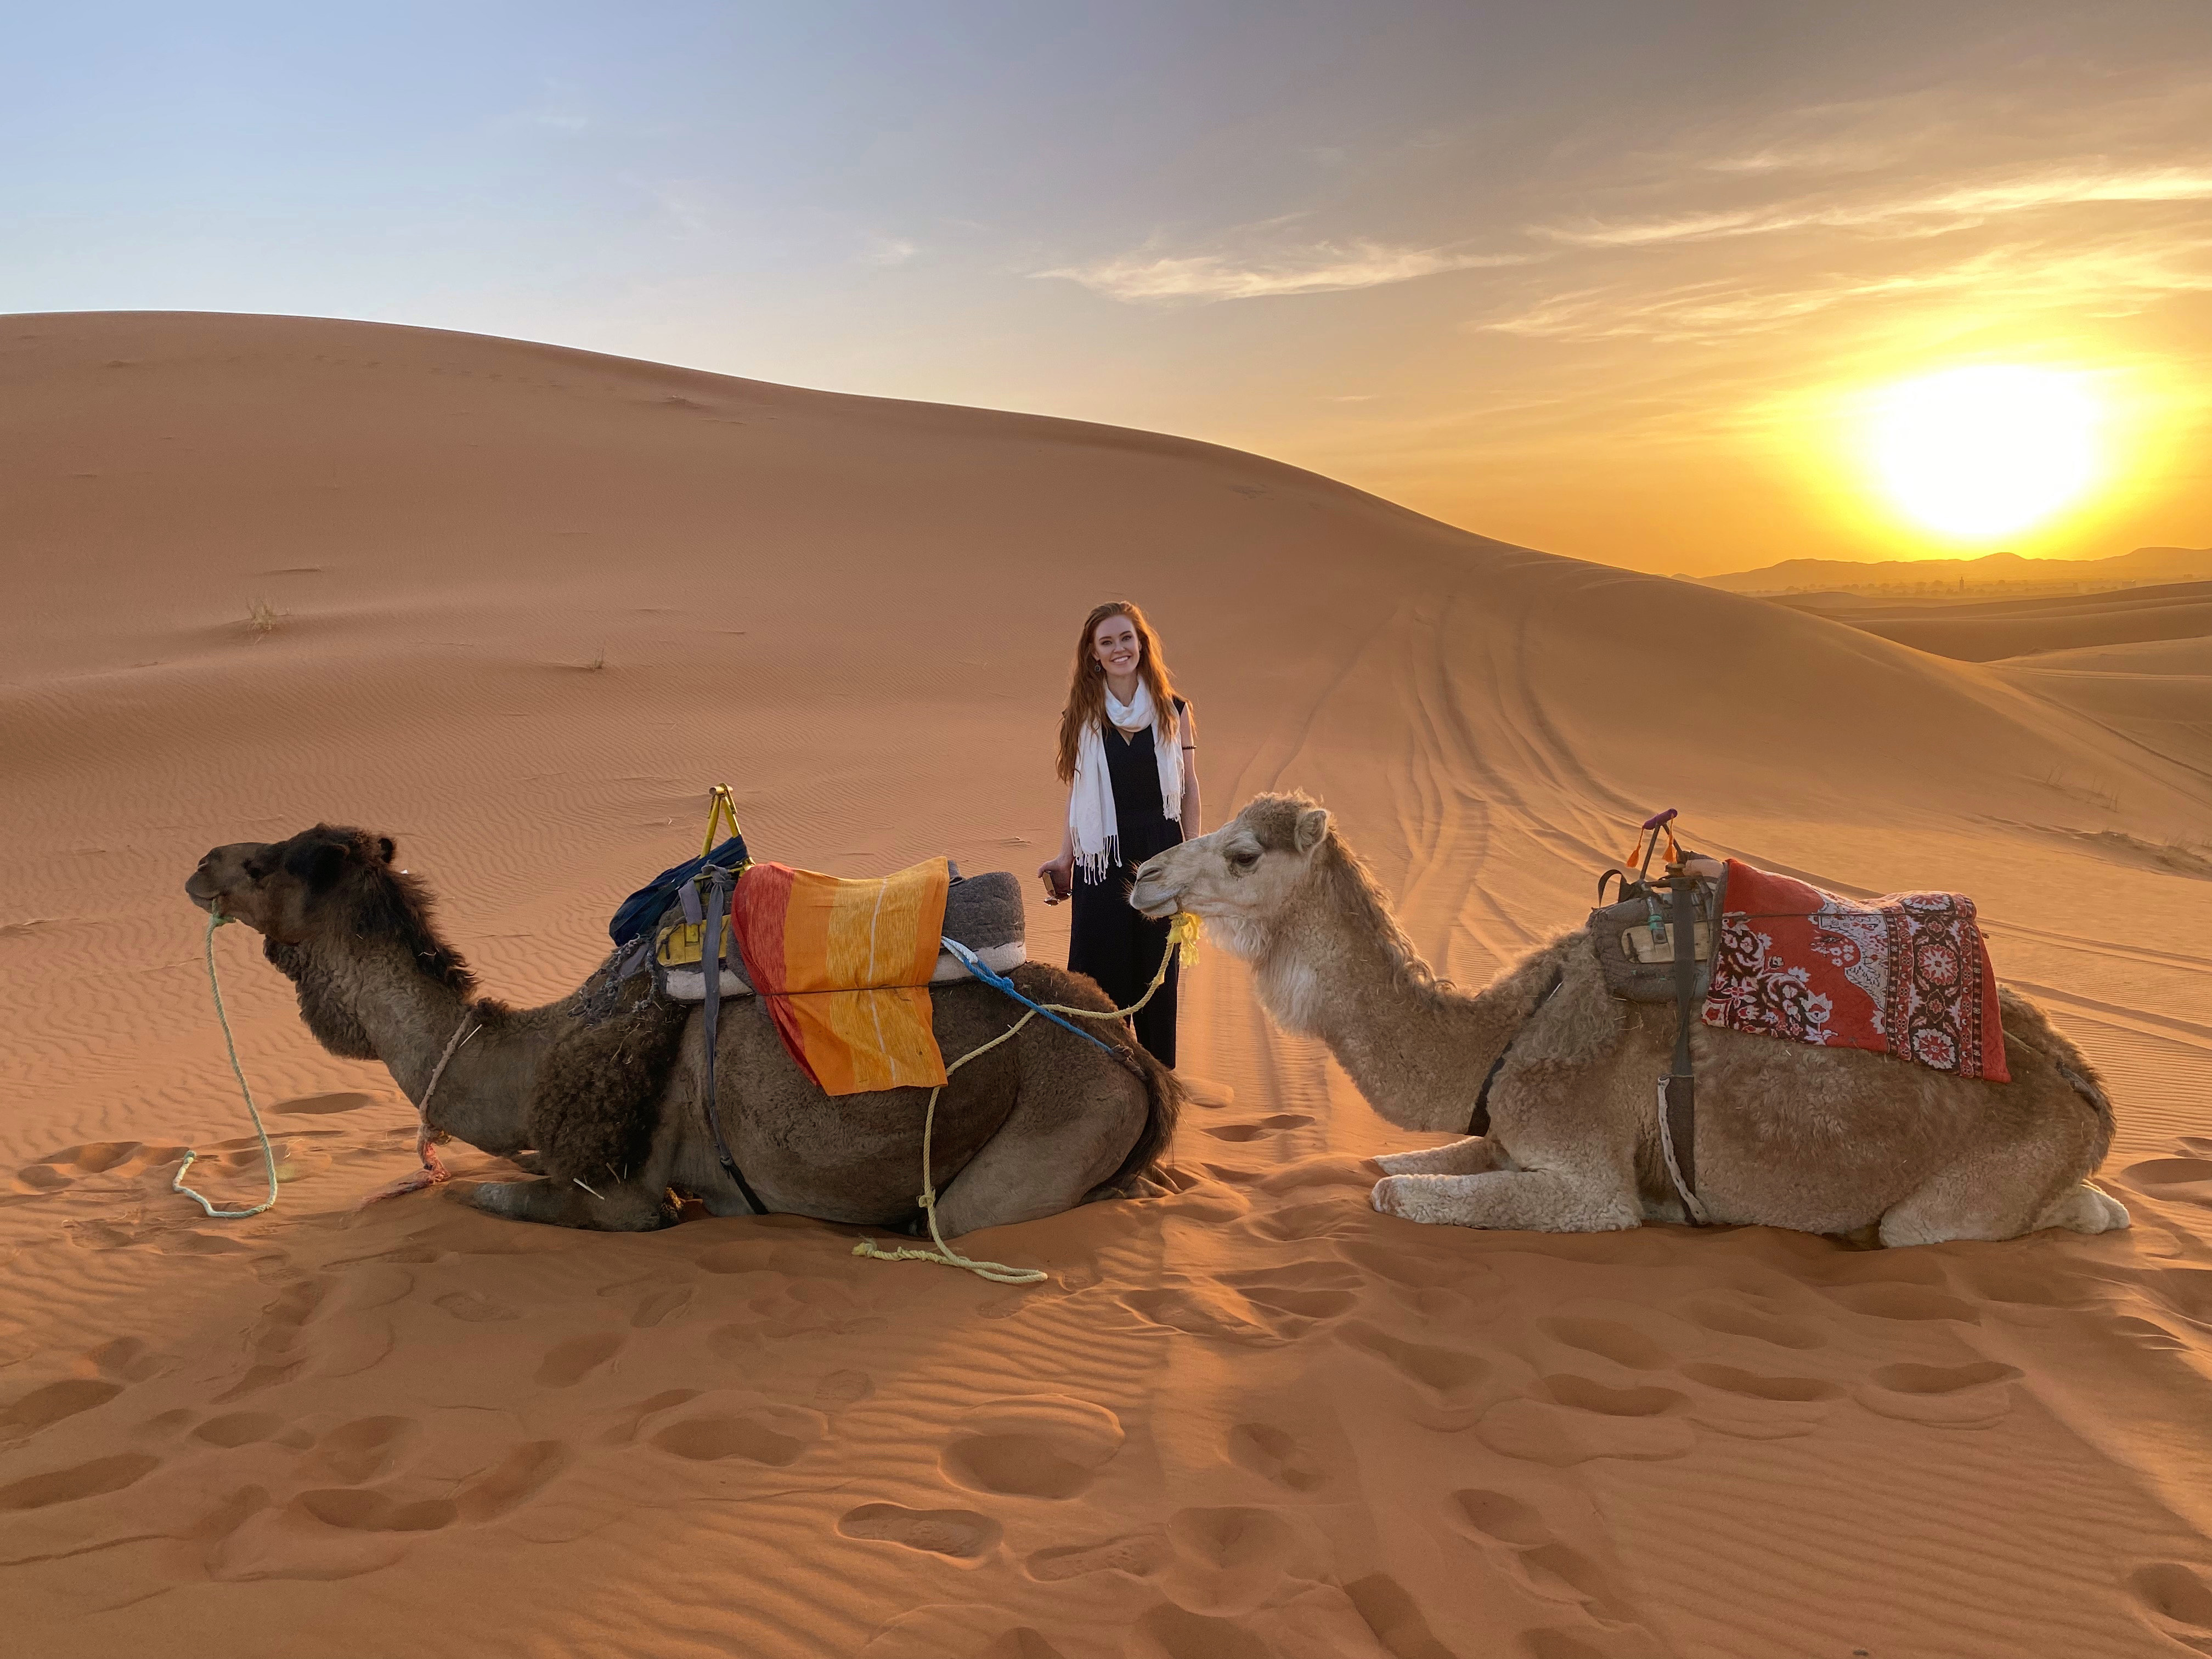 Crystal OGuin with two camels in the desert sunset